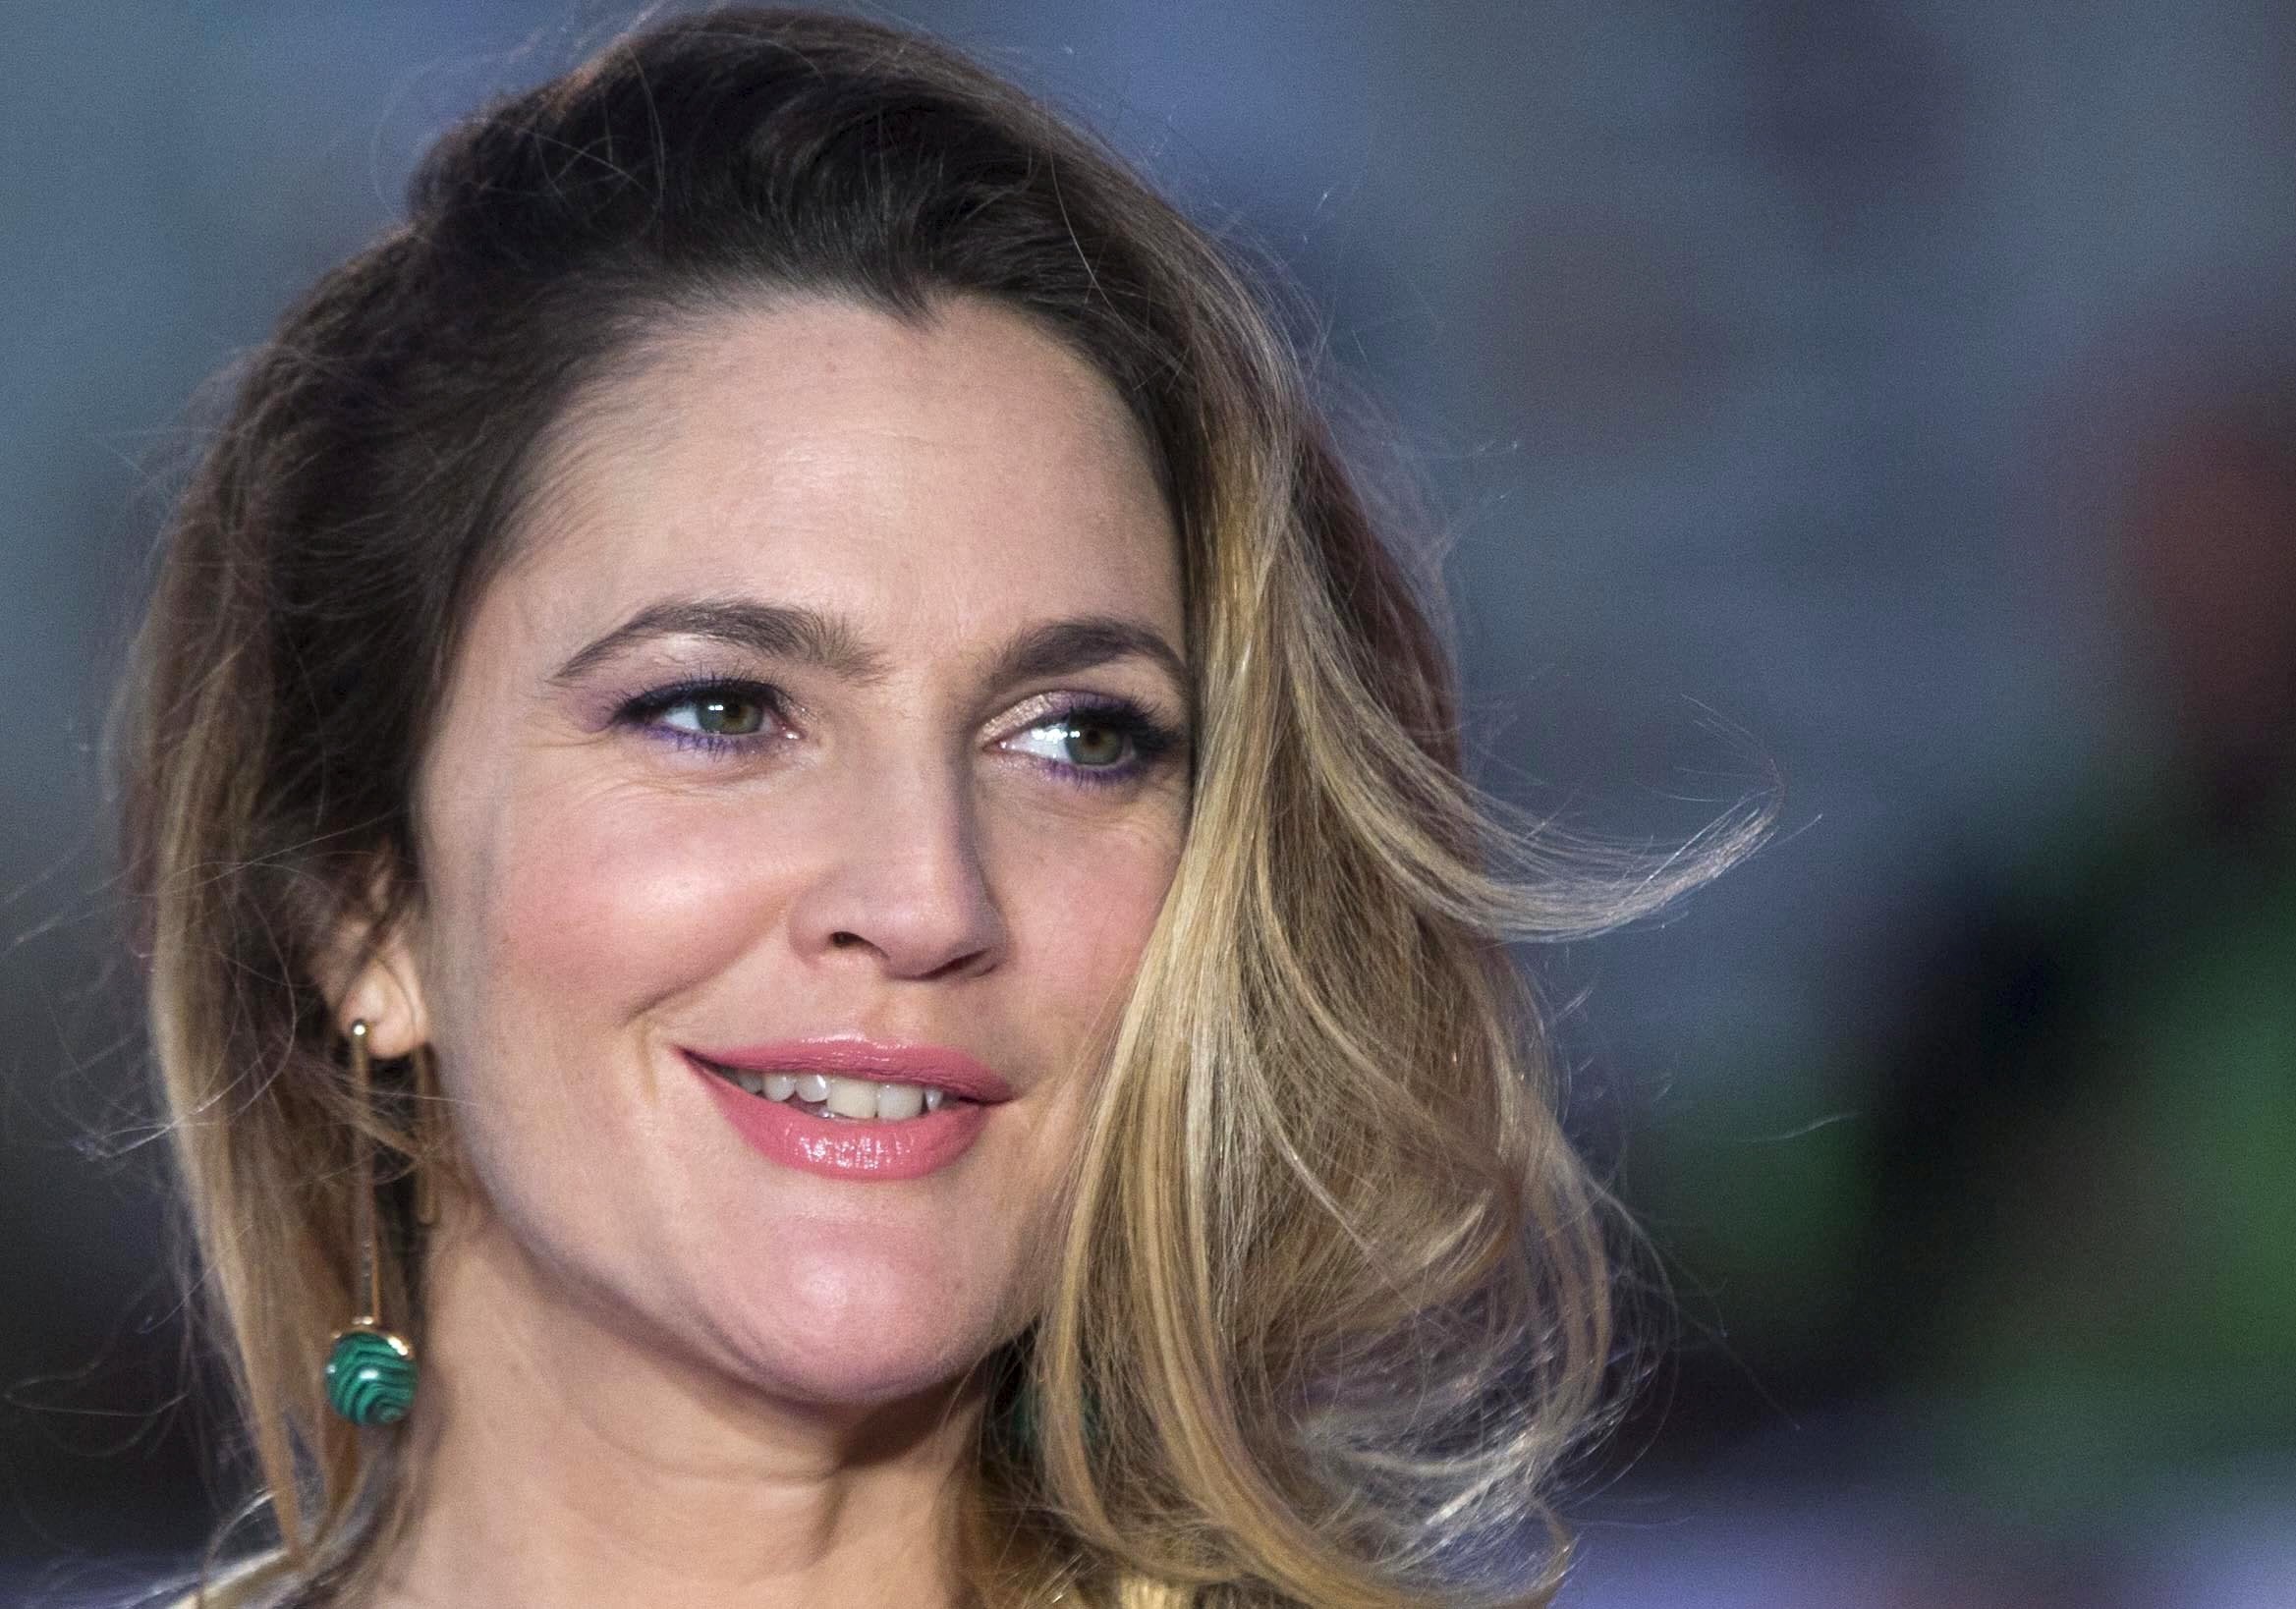 Drew Barrymore would rather age gracefully than go under the knife